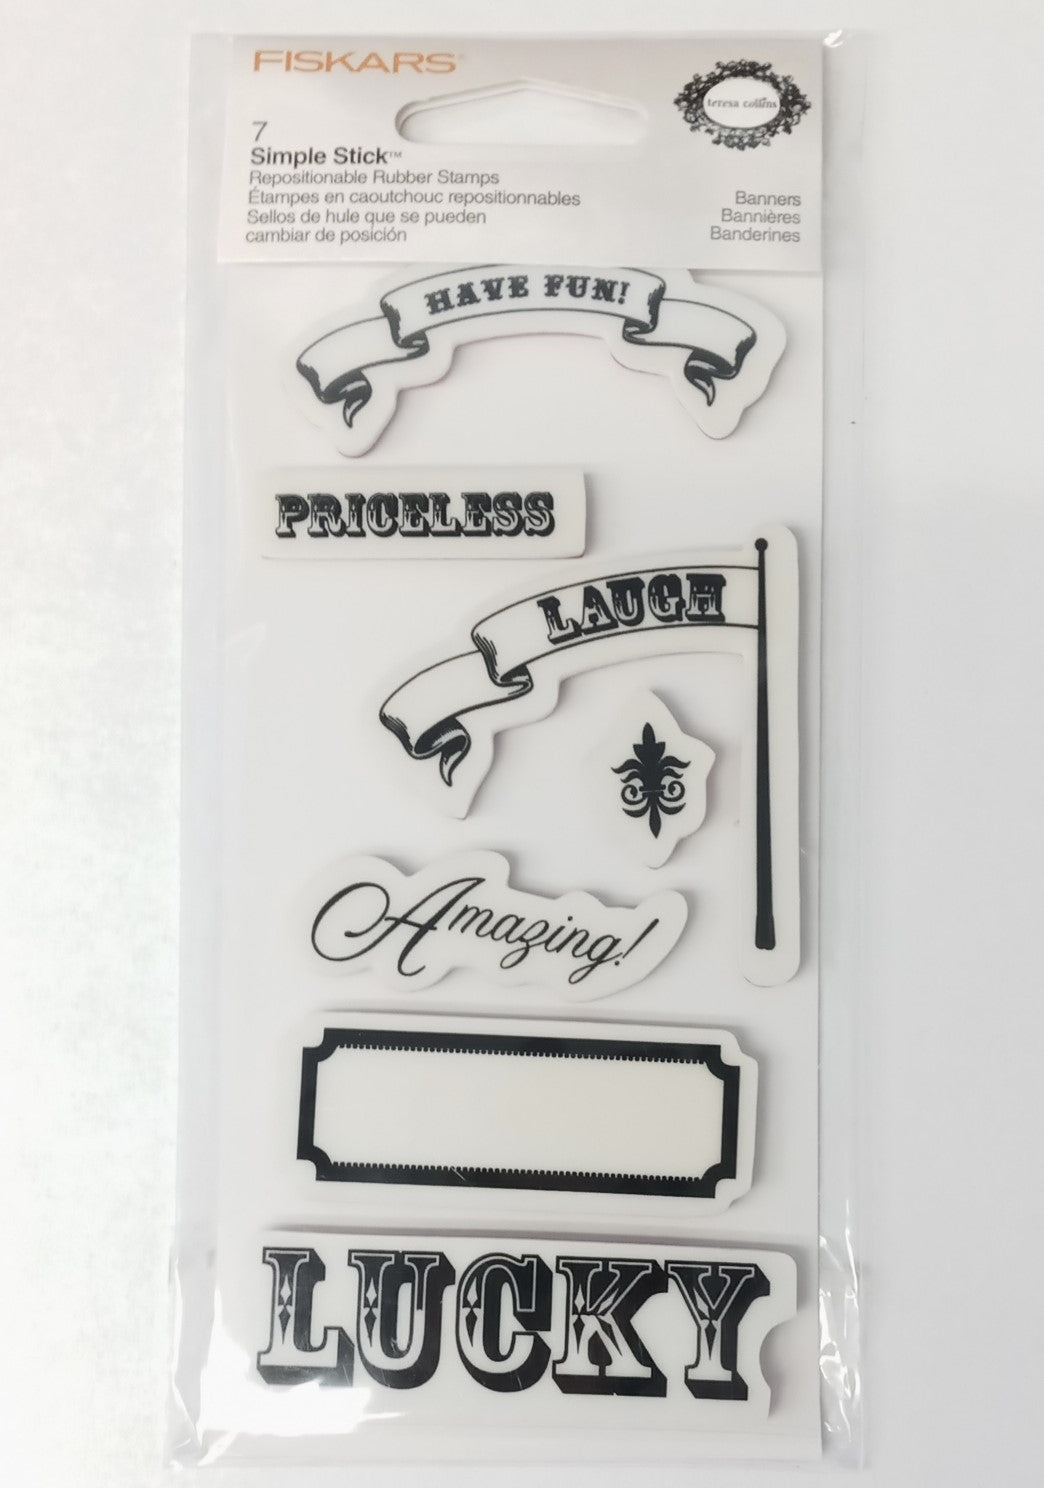 Fiskars 102990-1001 Teresa Collins Simple Stick Rubber Stamps Banners